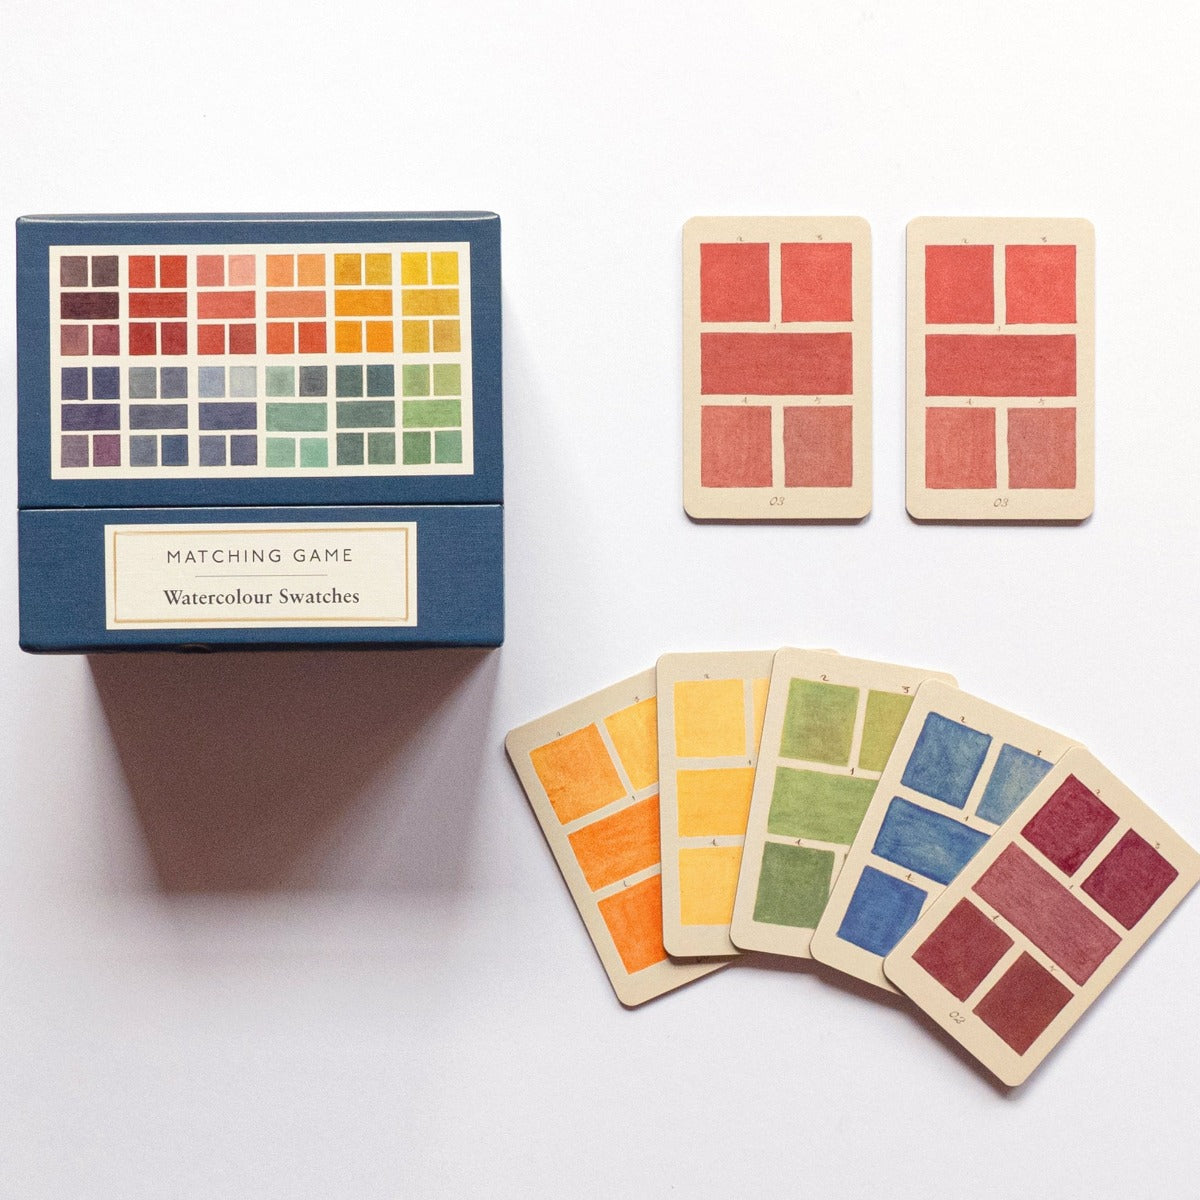 Watercolour Swatches Matching Game